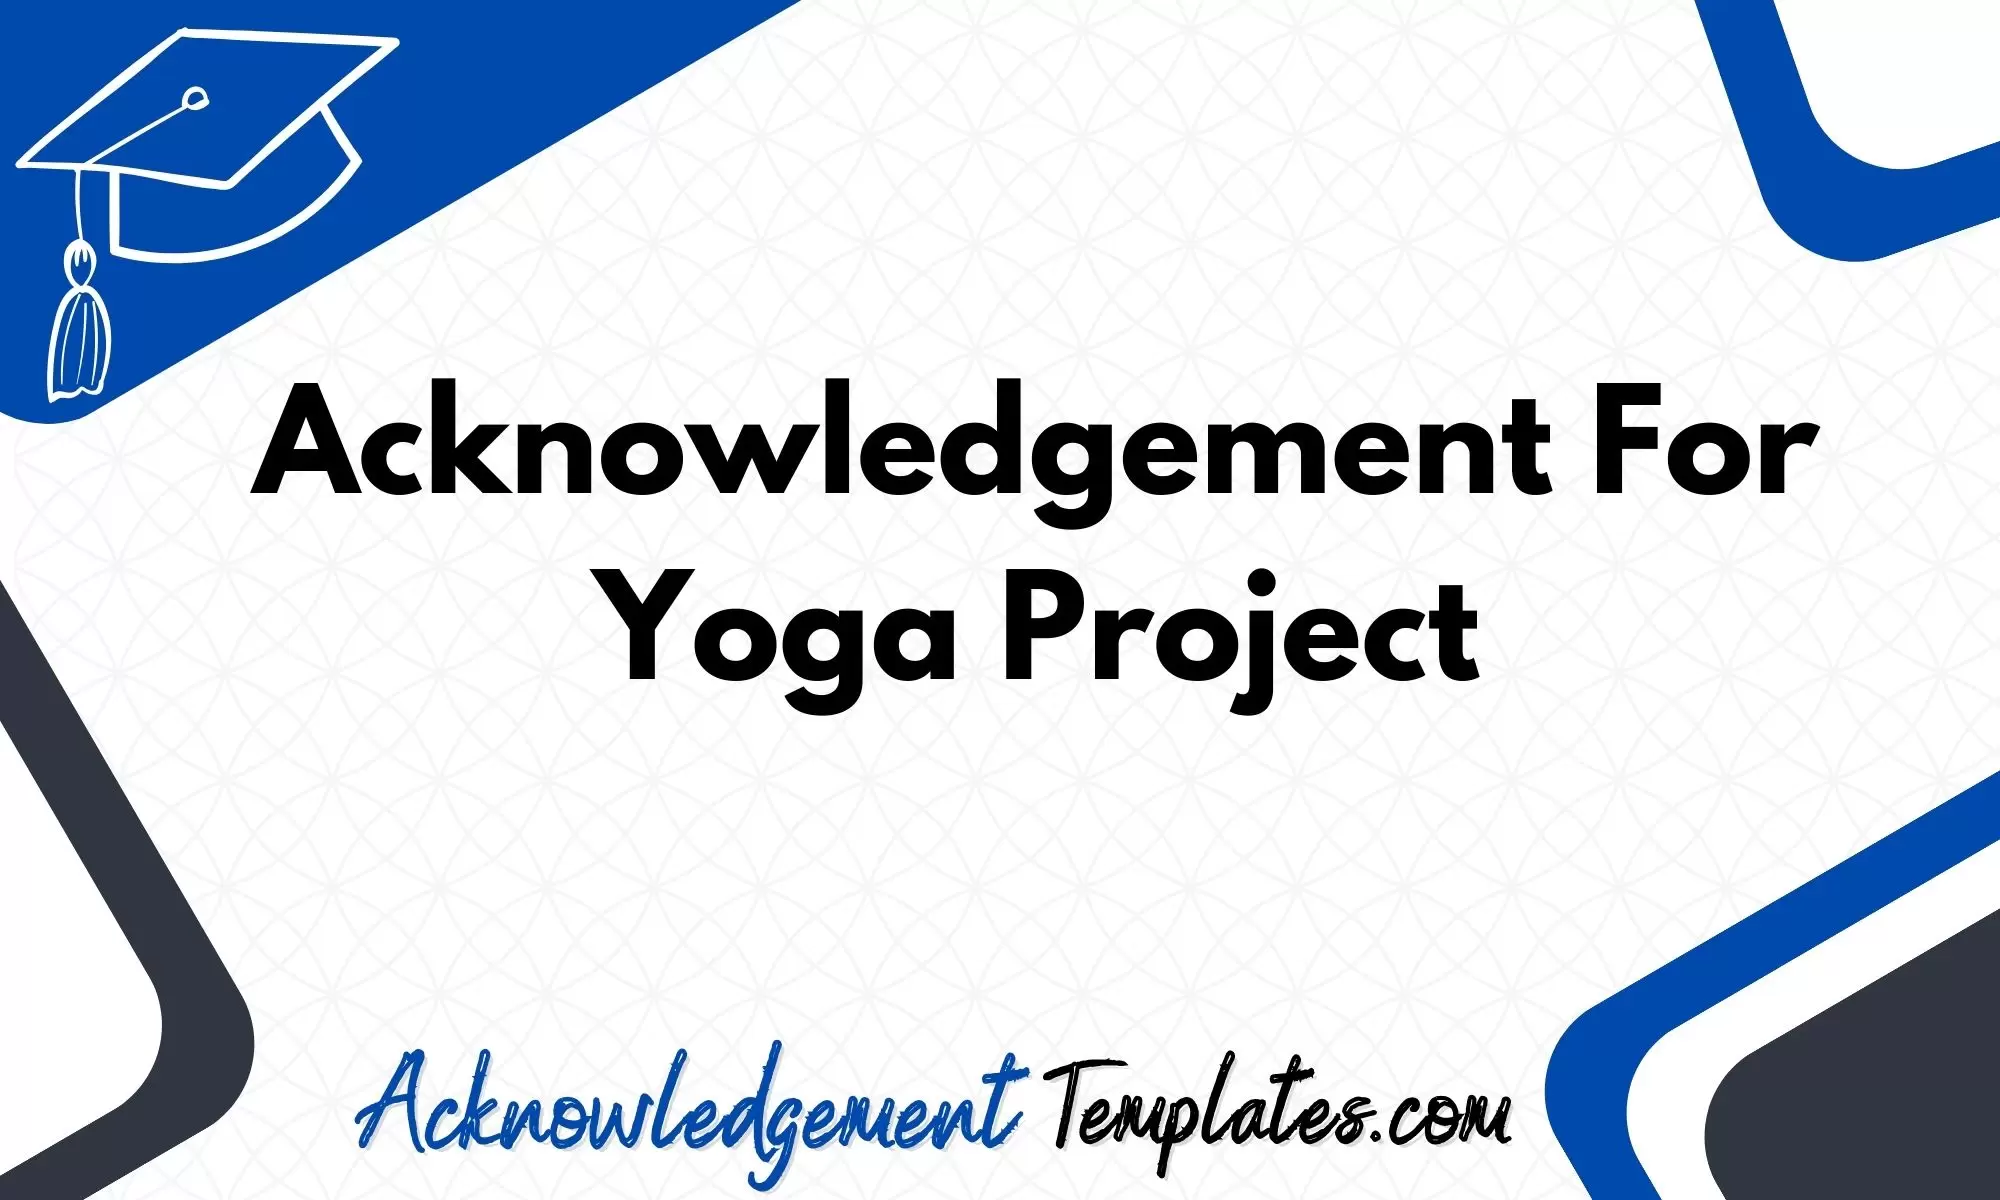 Acknowledgement For Yoga Project